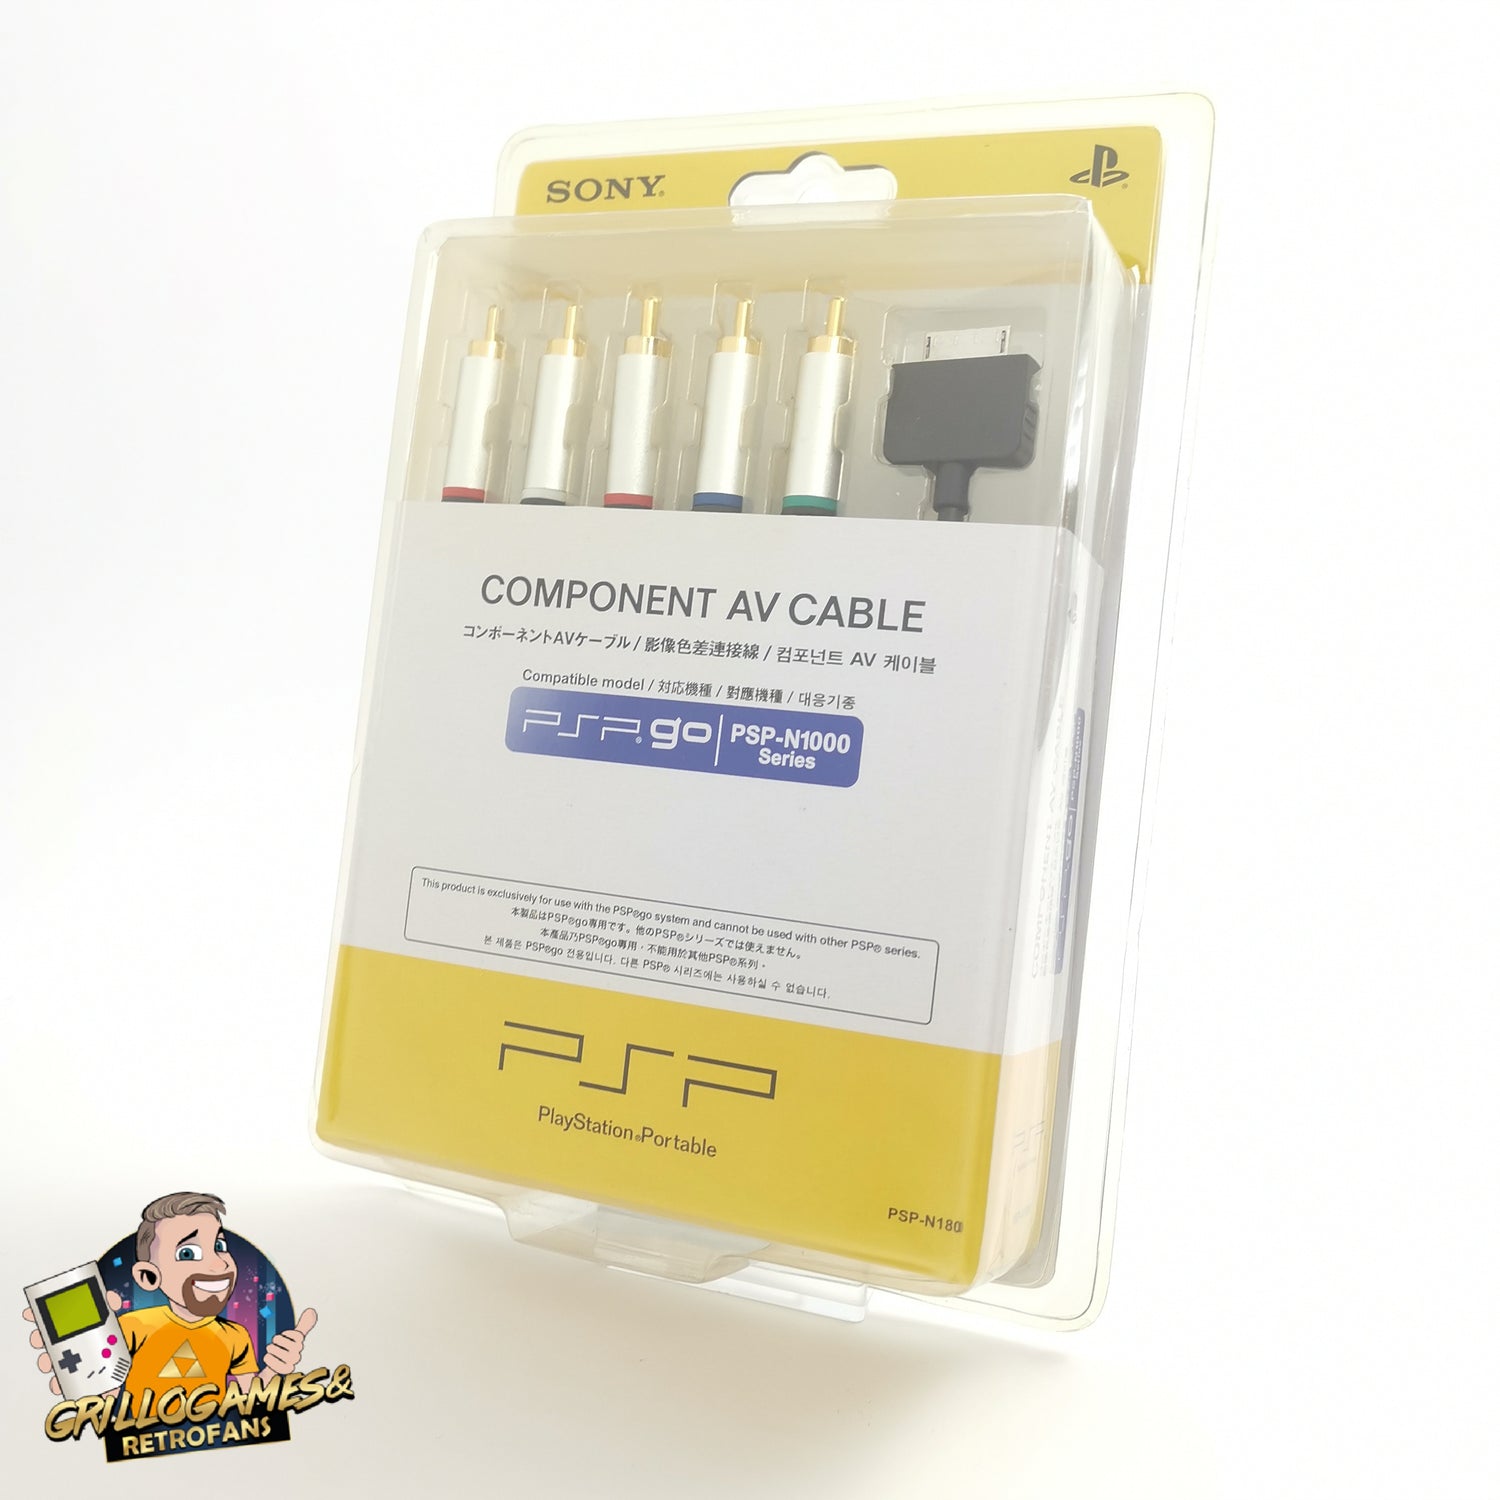 Sony Playstation Portable: Component AV Cable Cable | PSP go - OVP JAP N1000 S